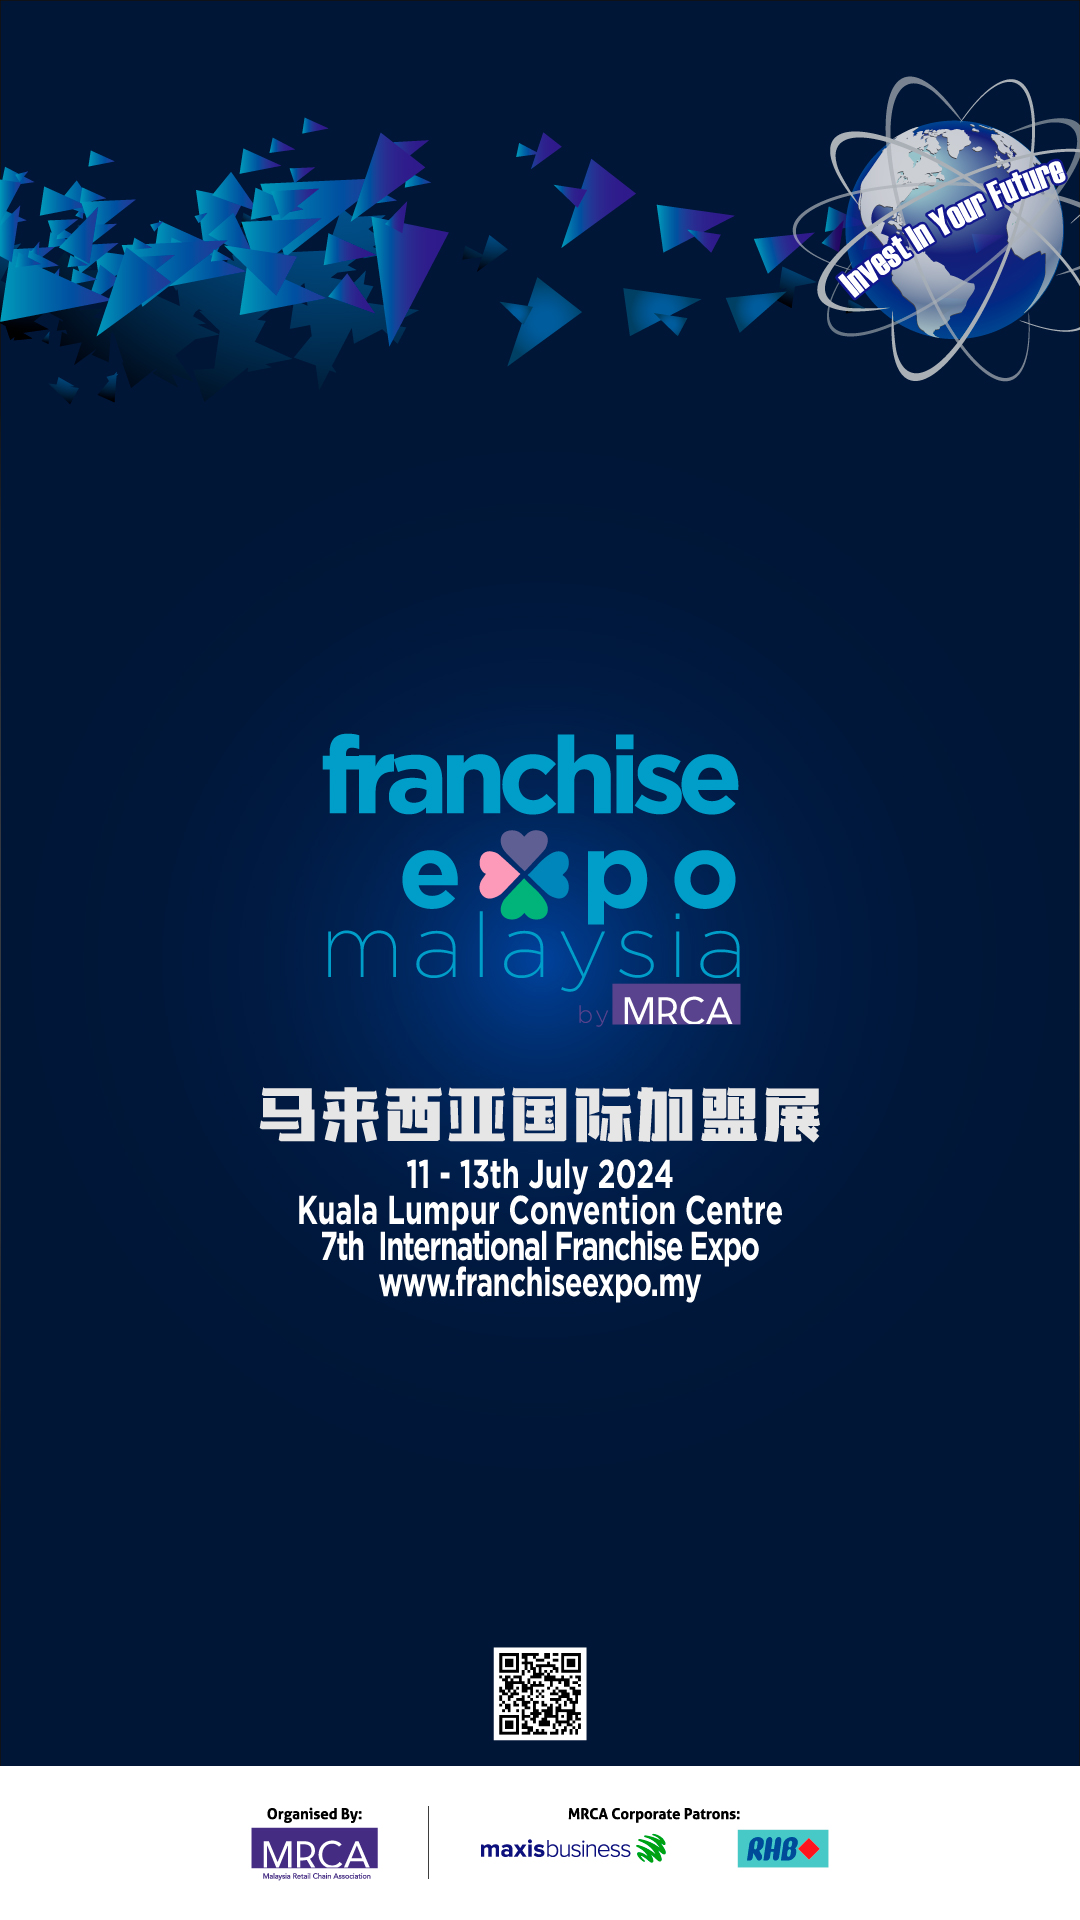 Franchise Expo Malaysia 2024 at Kuala Lumpur Convention Centre